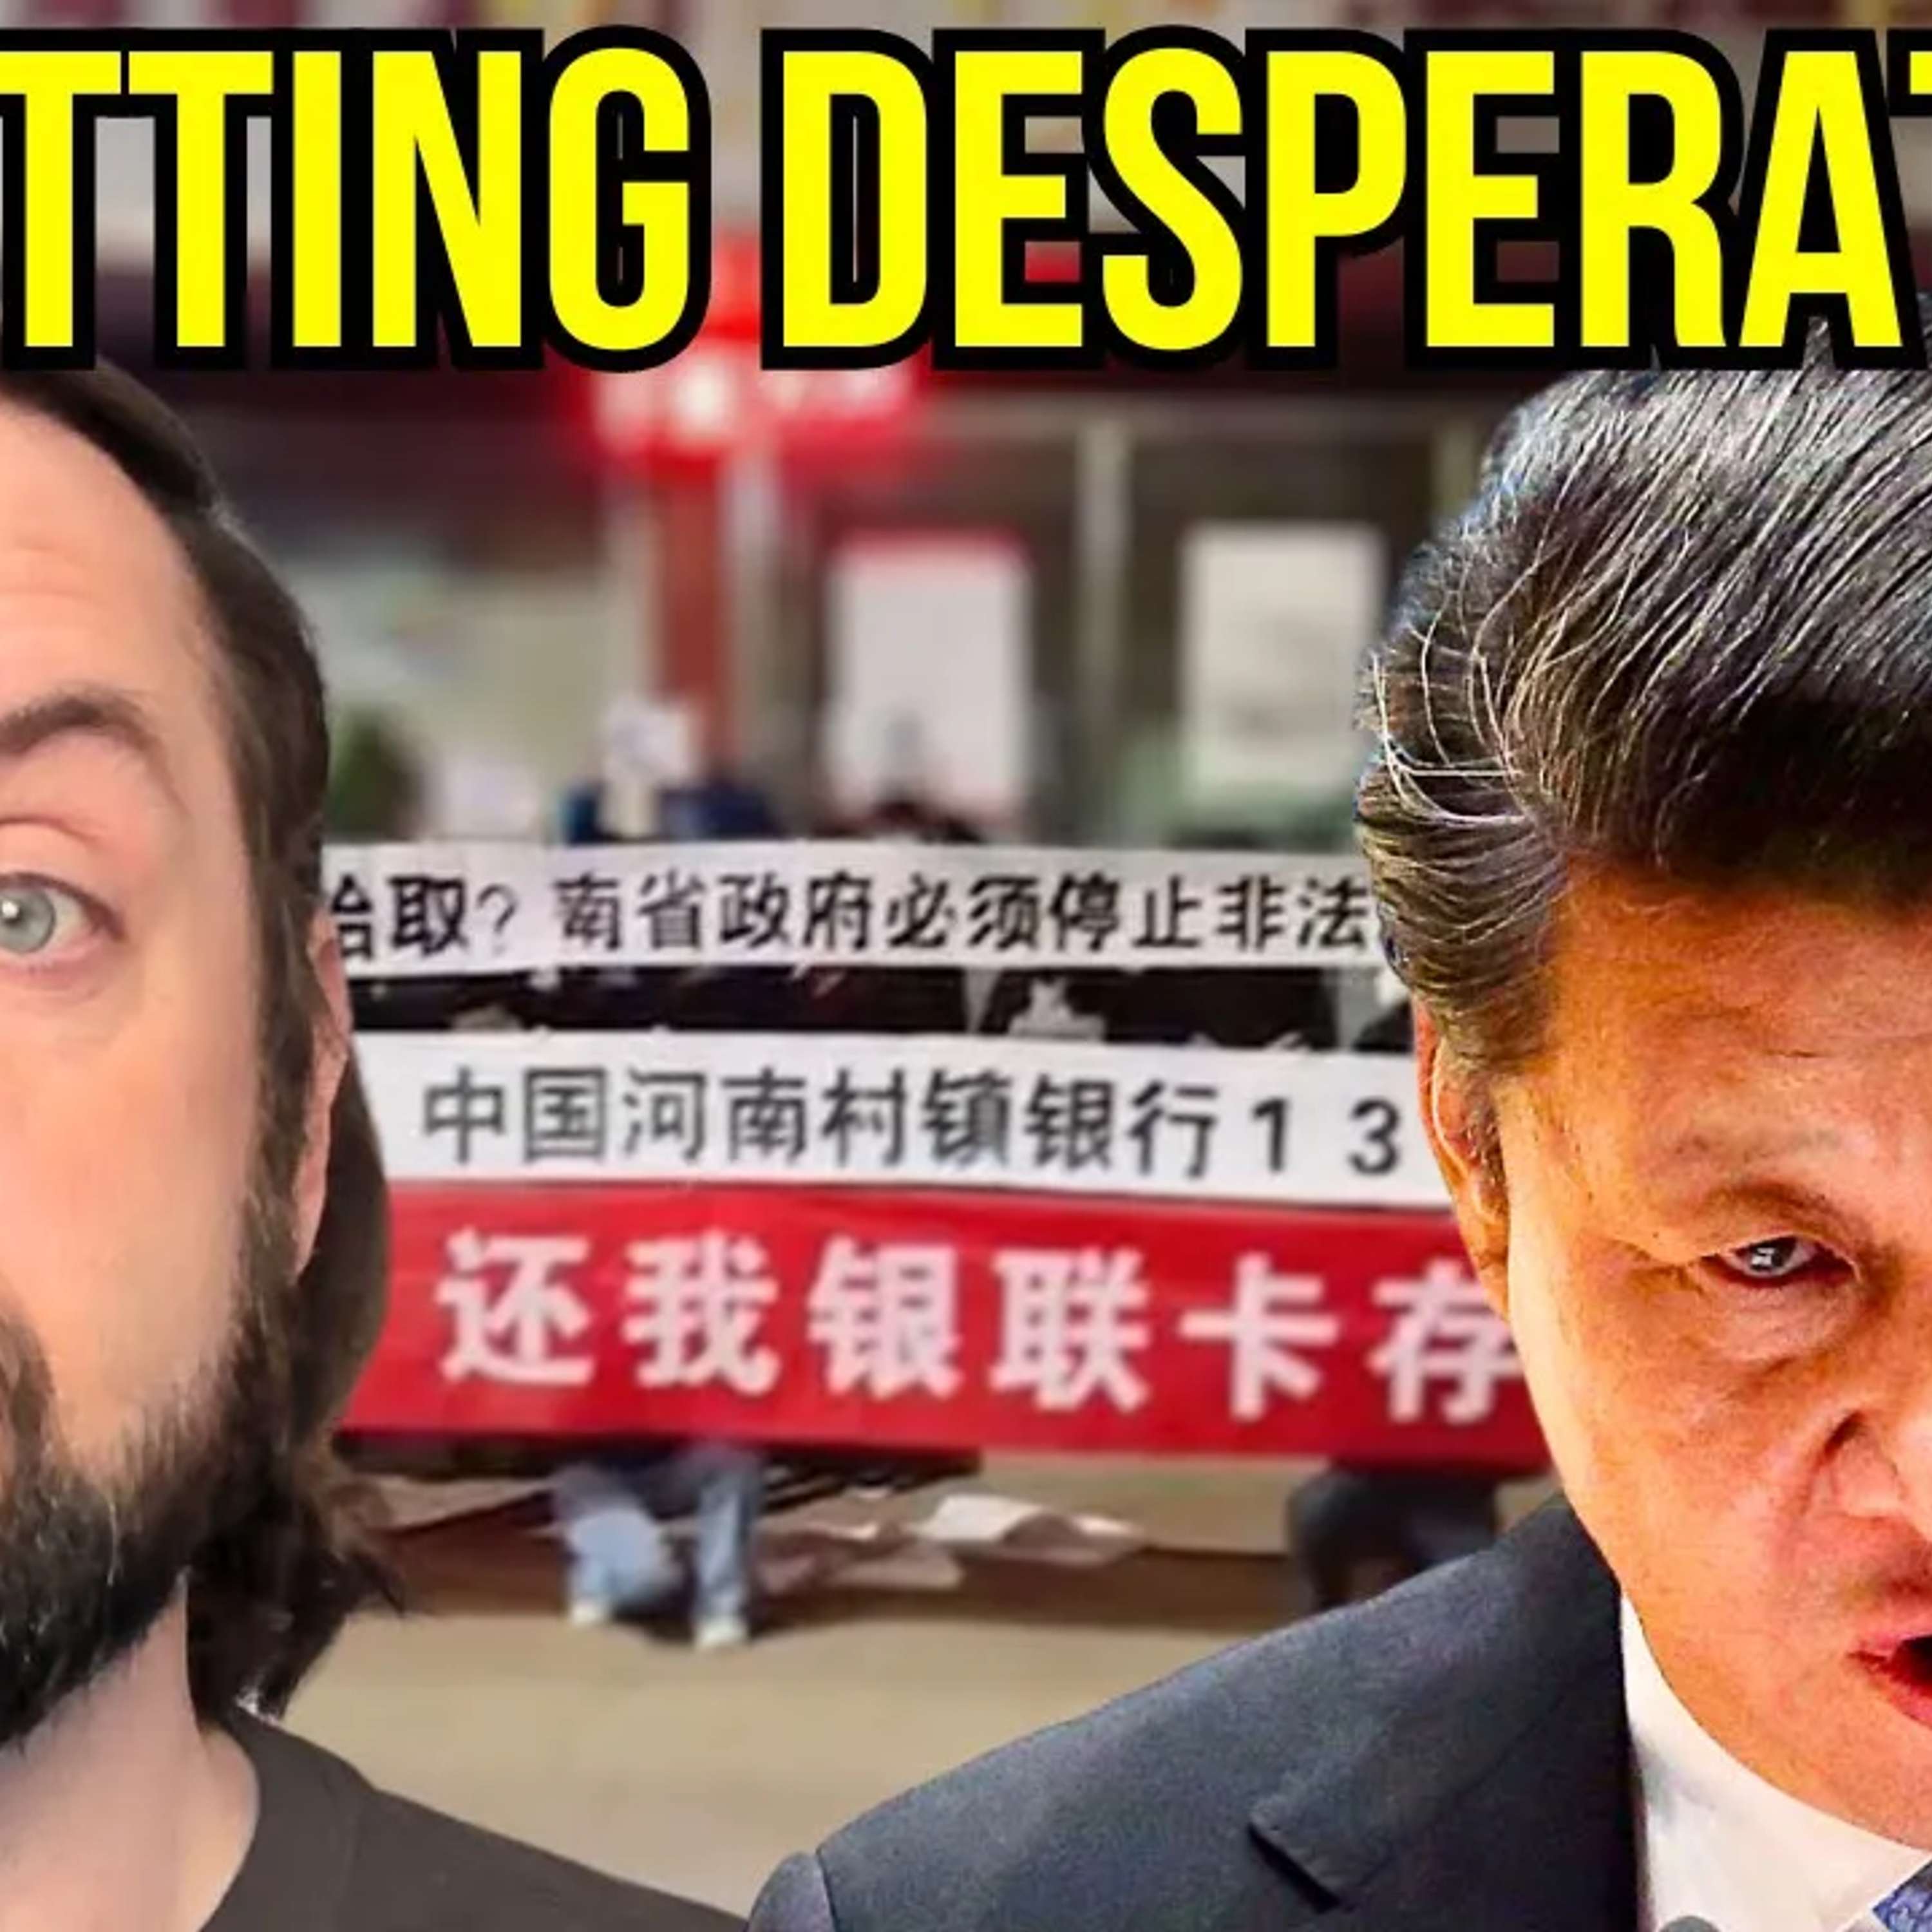 You Won't Believe What's Happening in China